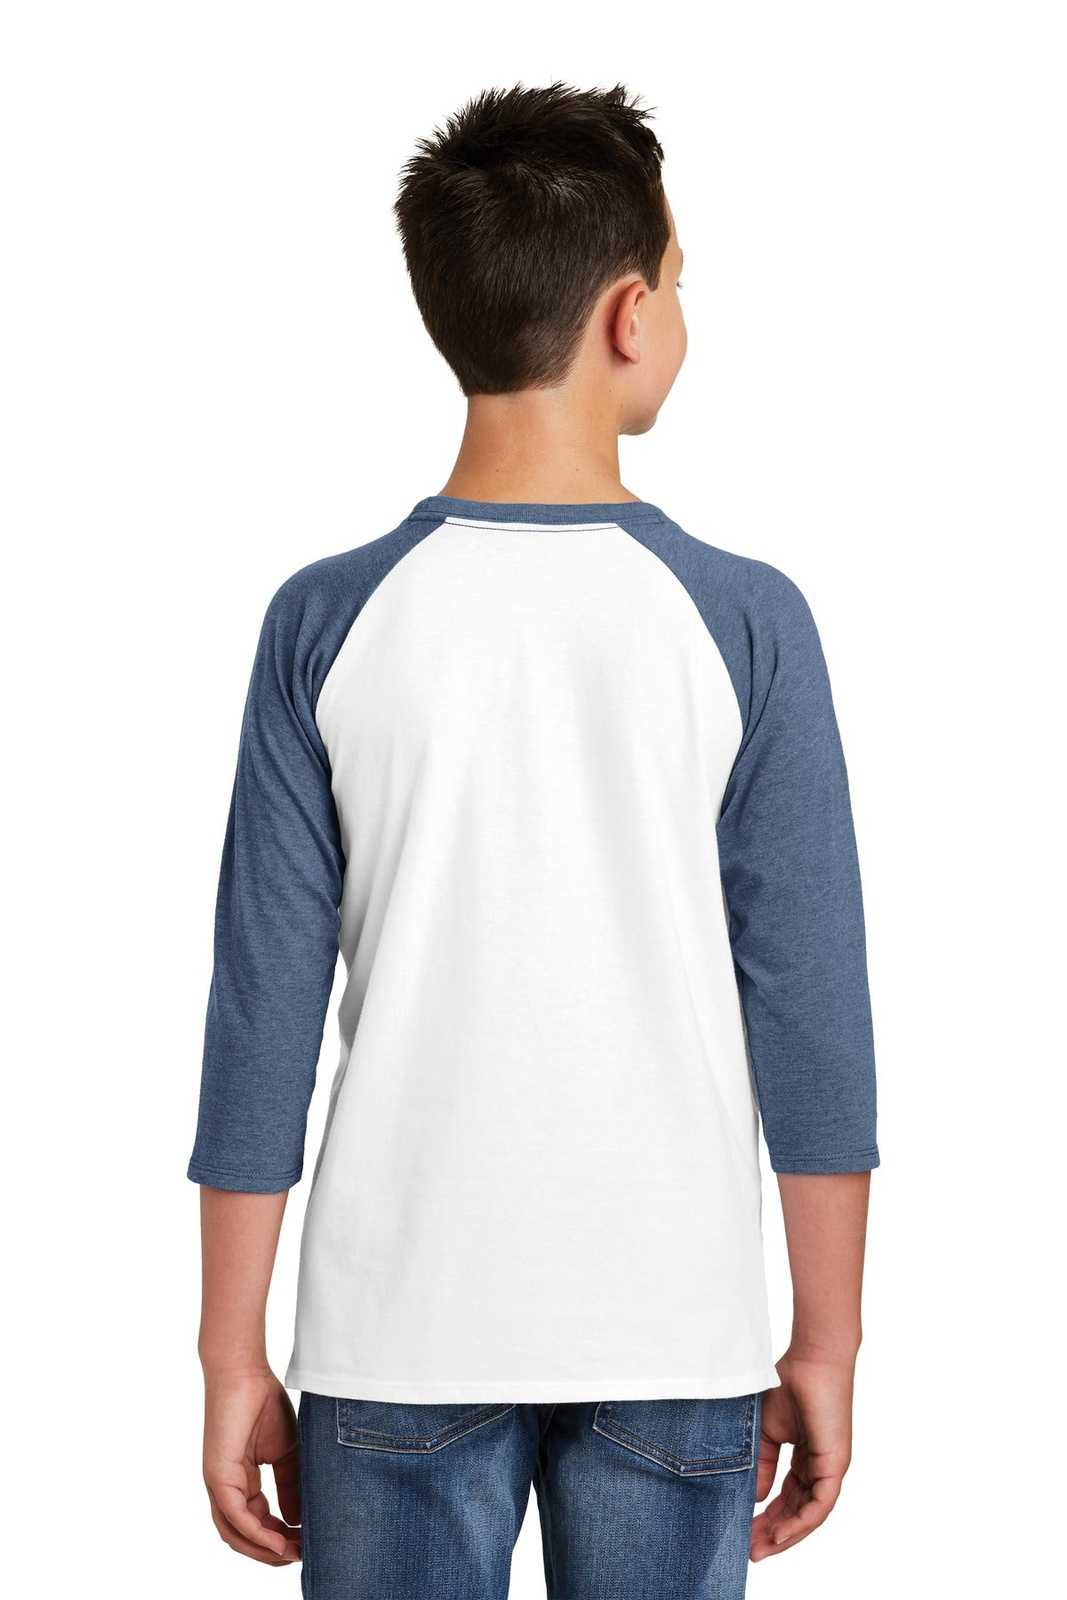 District DT6210Y Youth Very Important Tee 3/4-Sleeve - Heathered Navy White - HIT a Double - 2